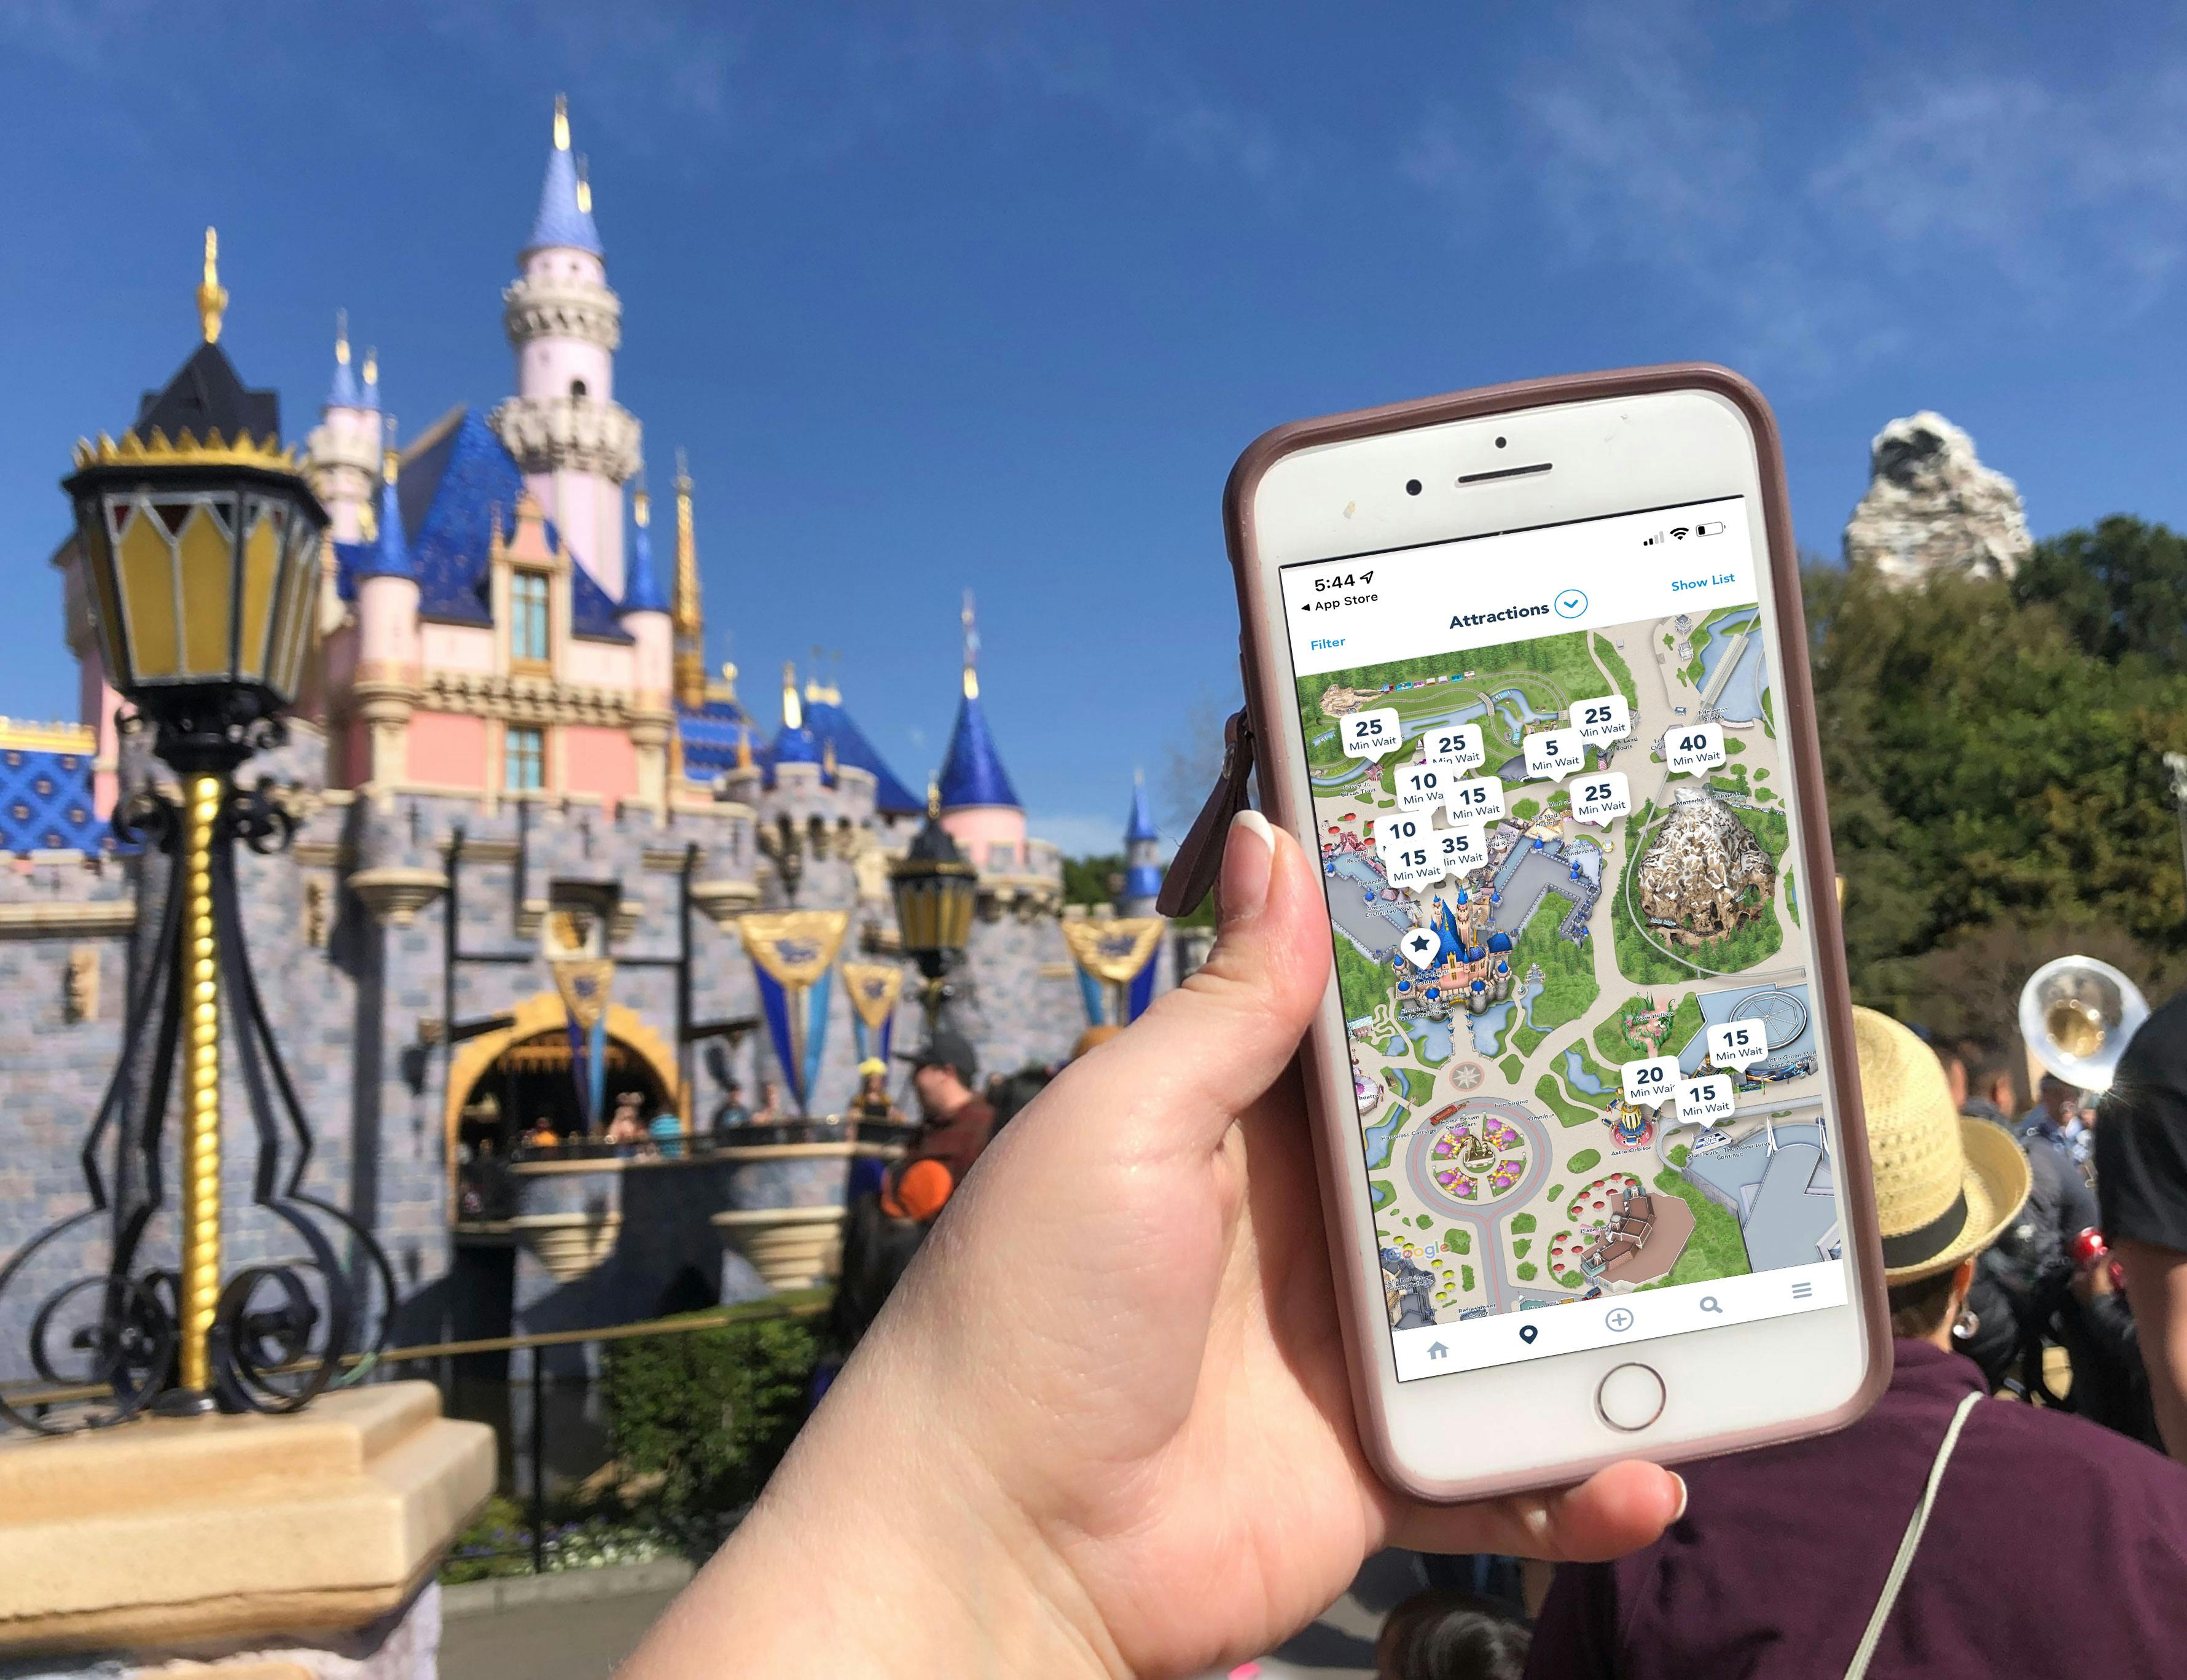 A person's hand holding up a phone displaying the Disneyland app with wait times on a map in front of the Magic Kingdom castle.